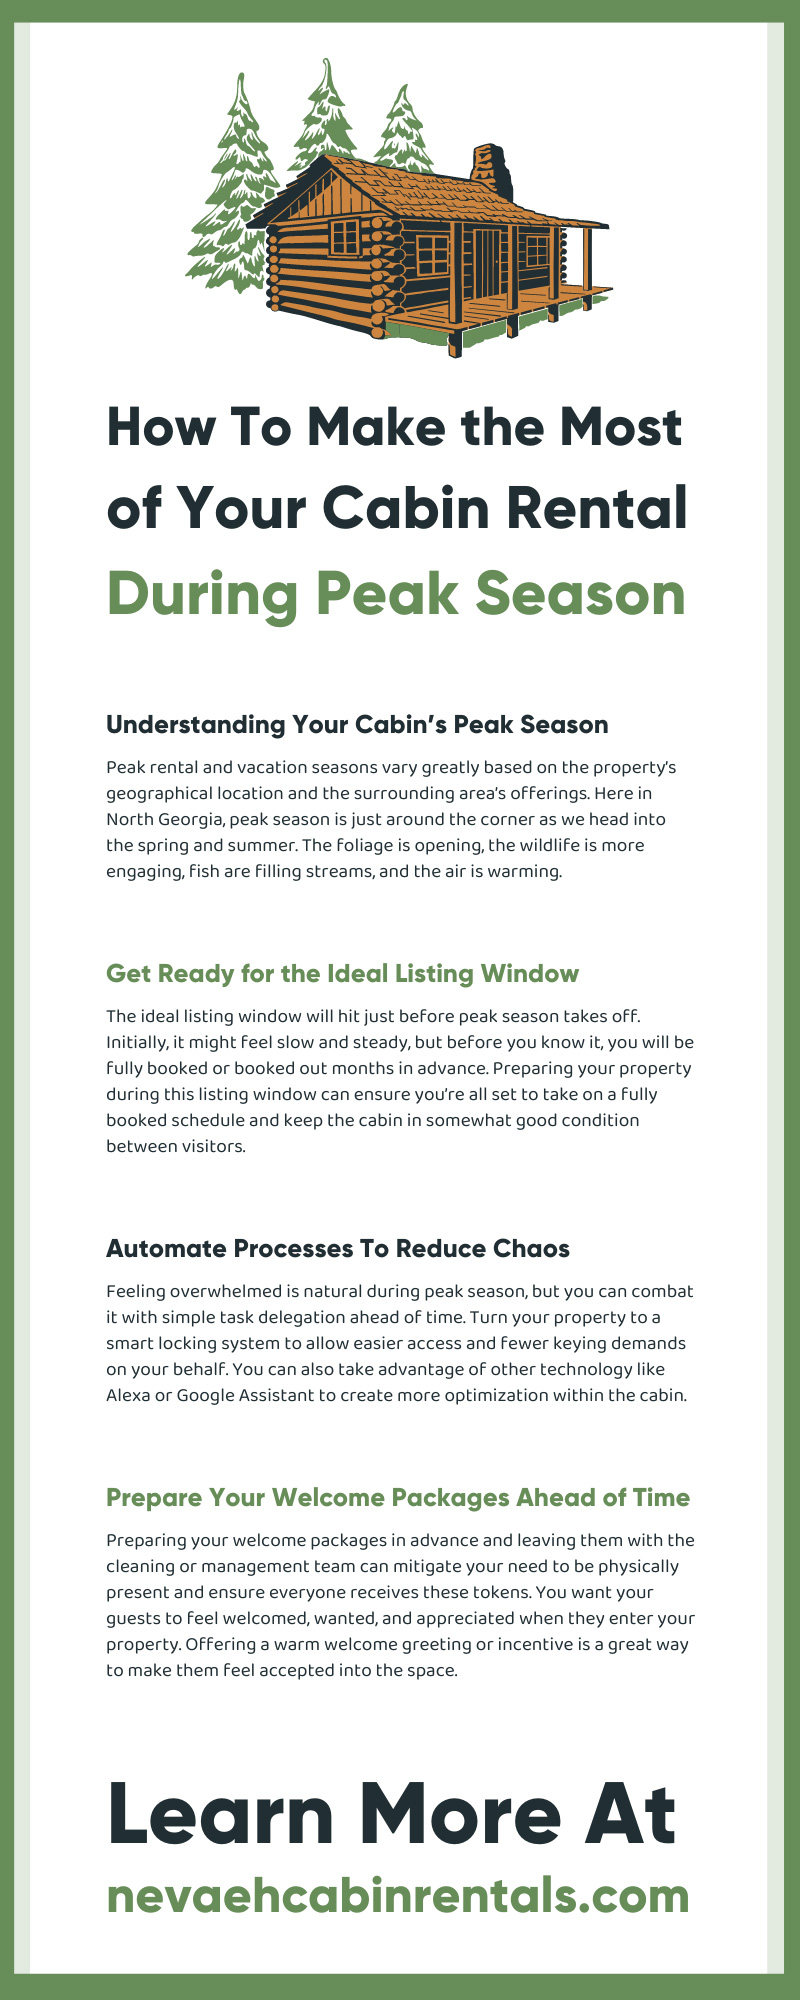 How To Make the Most of Your Cabin Rental During Peak Season